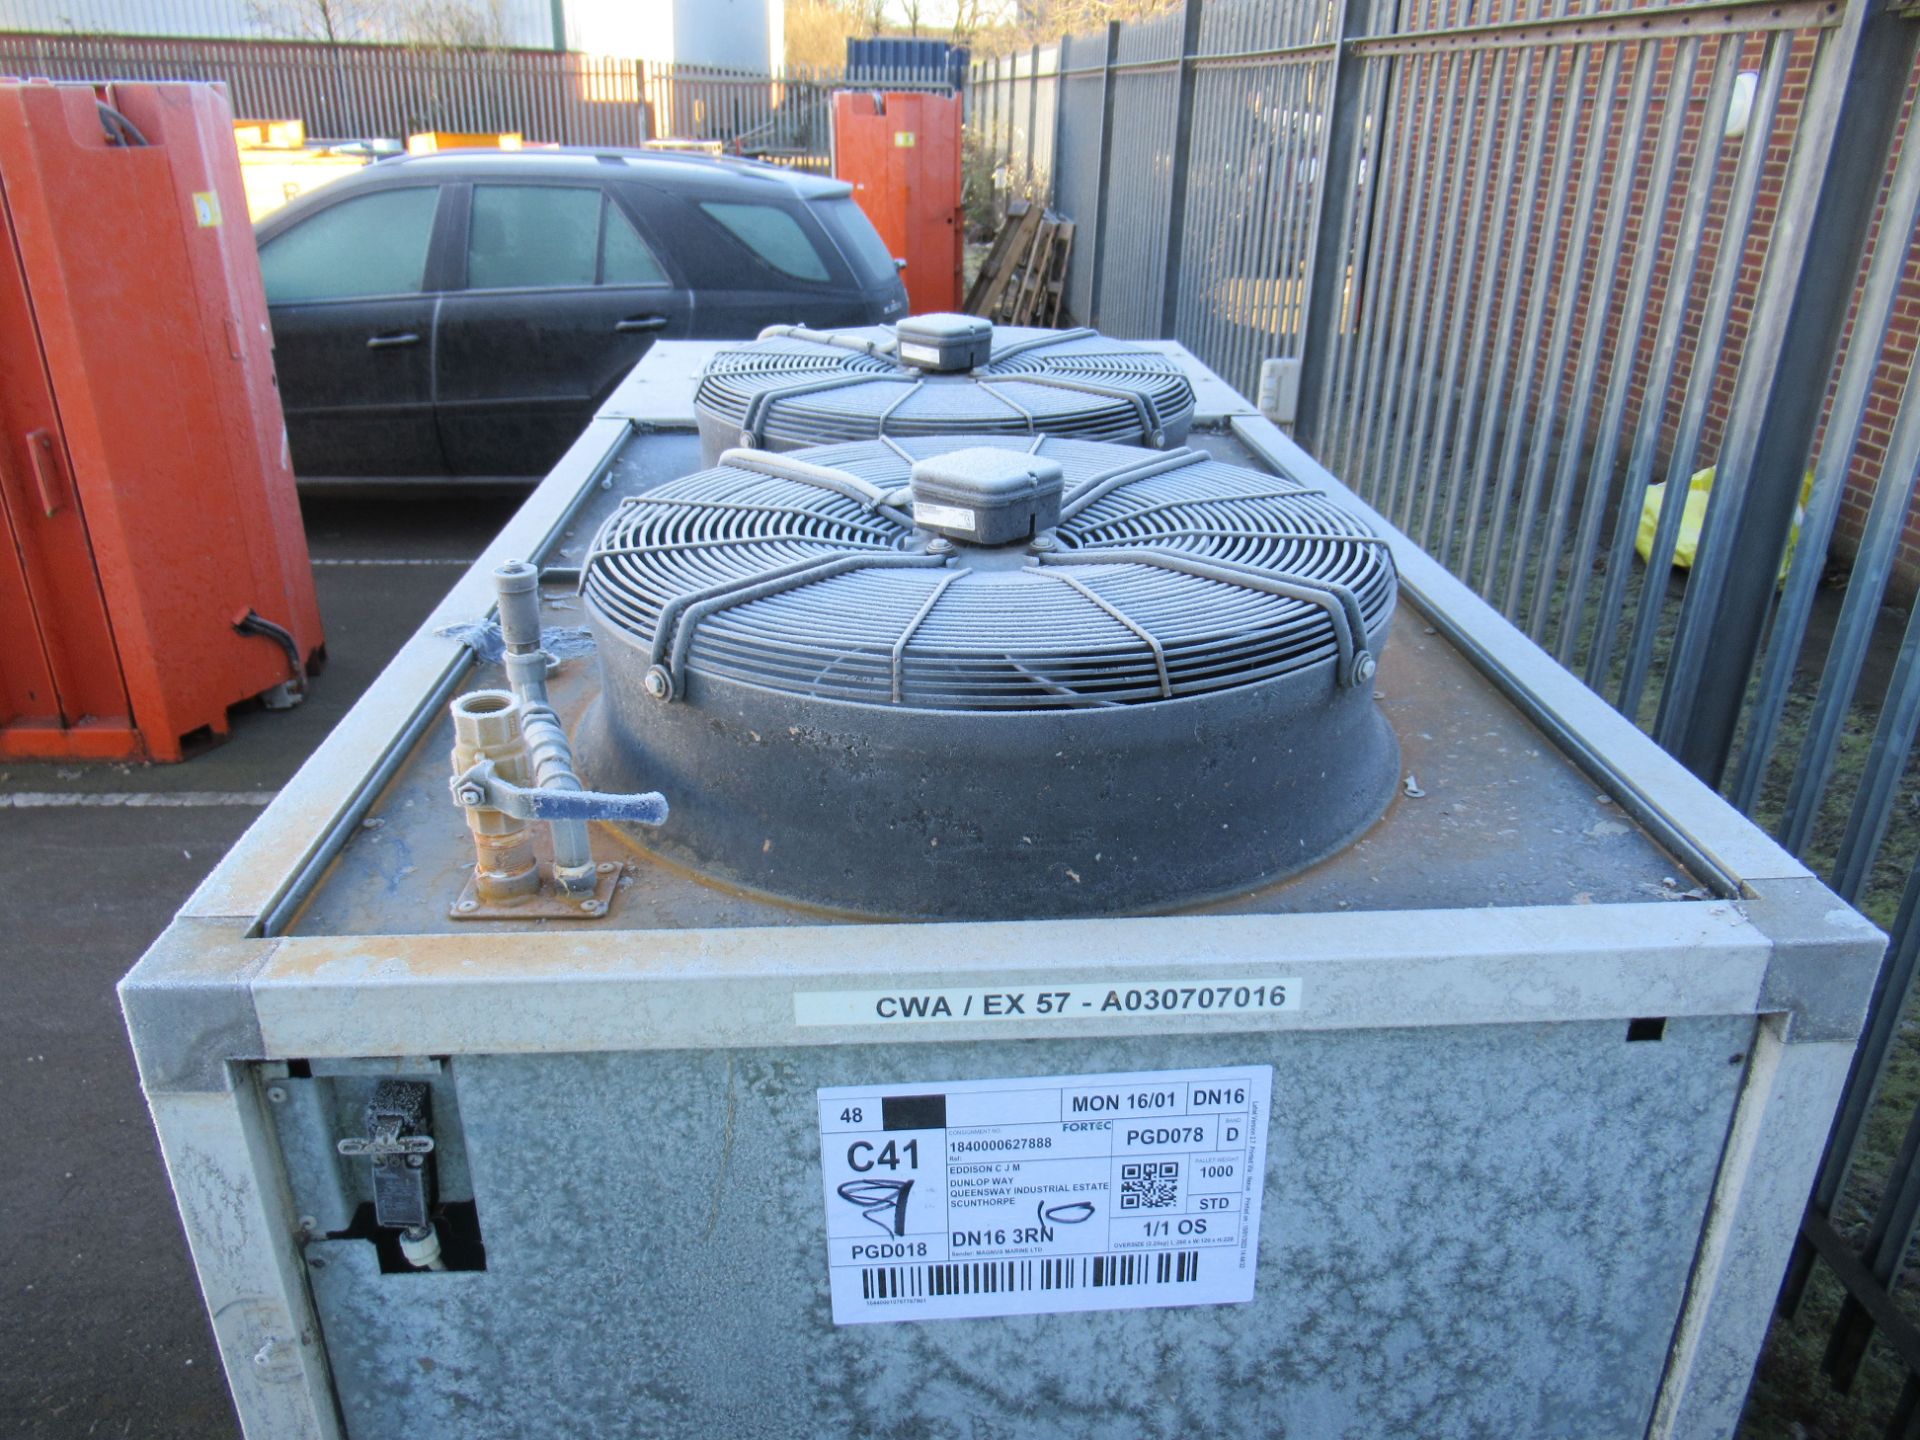 Rhoss industrial water chiller, model number CWA/EX57,66 kW cooling capacity - Image 7 of 14